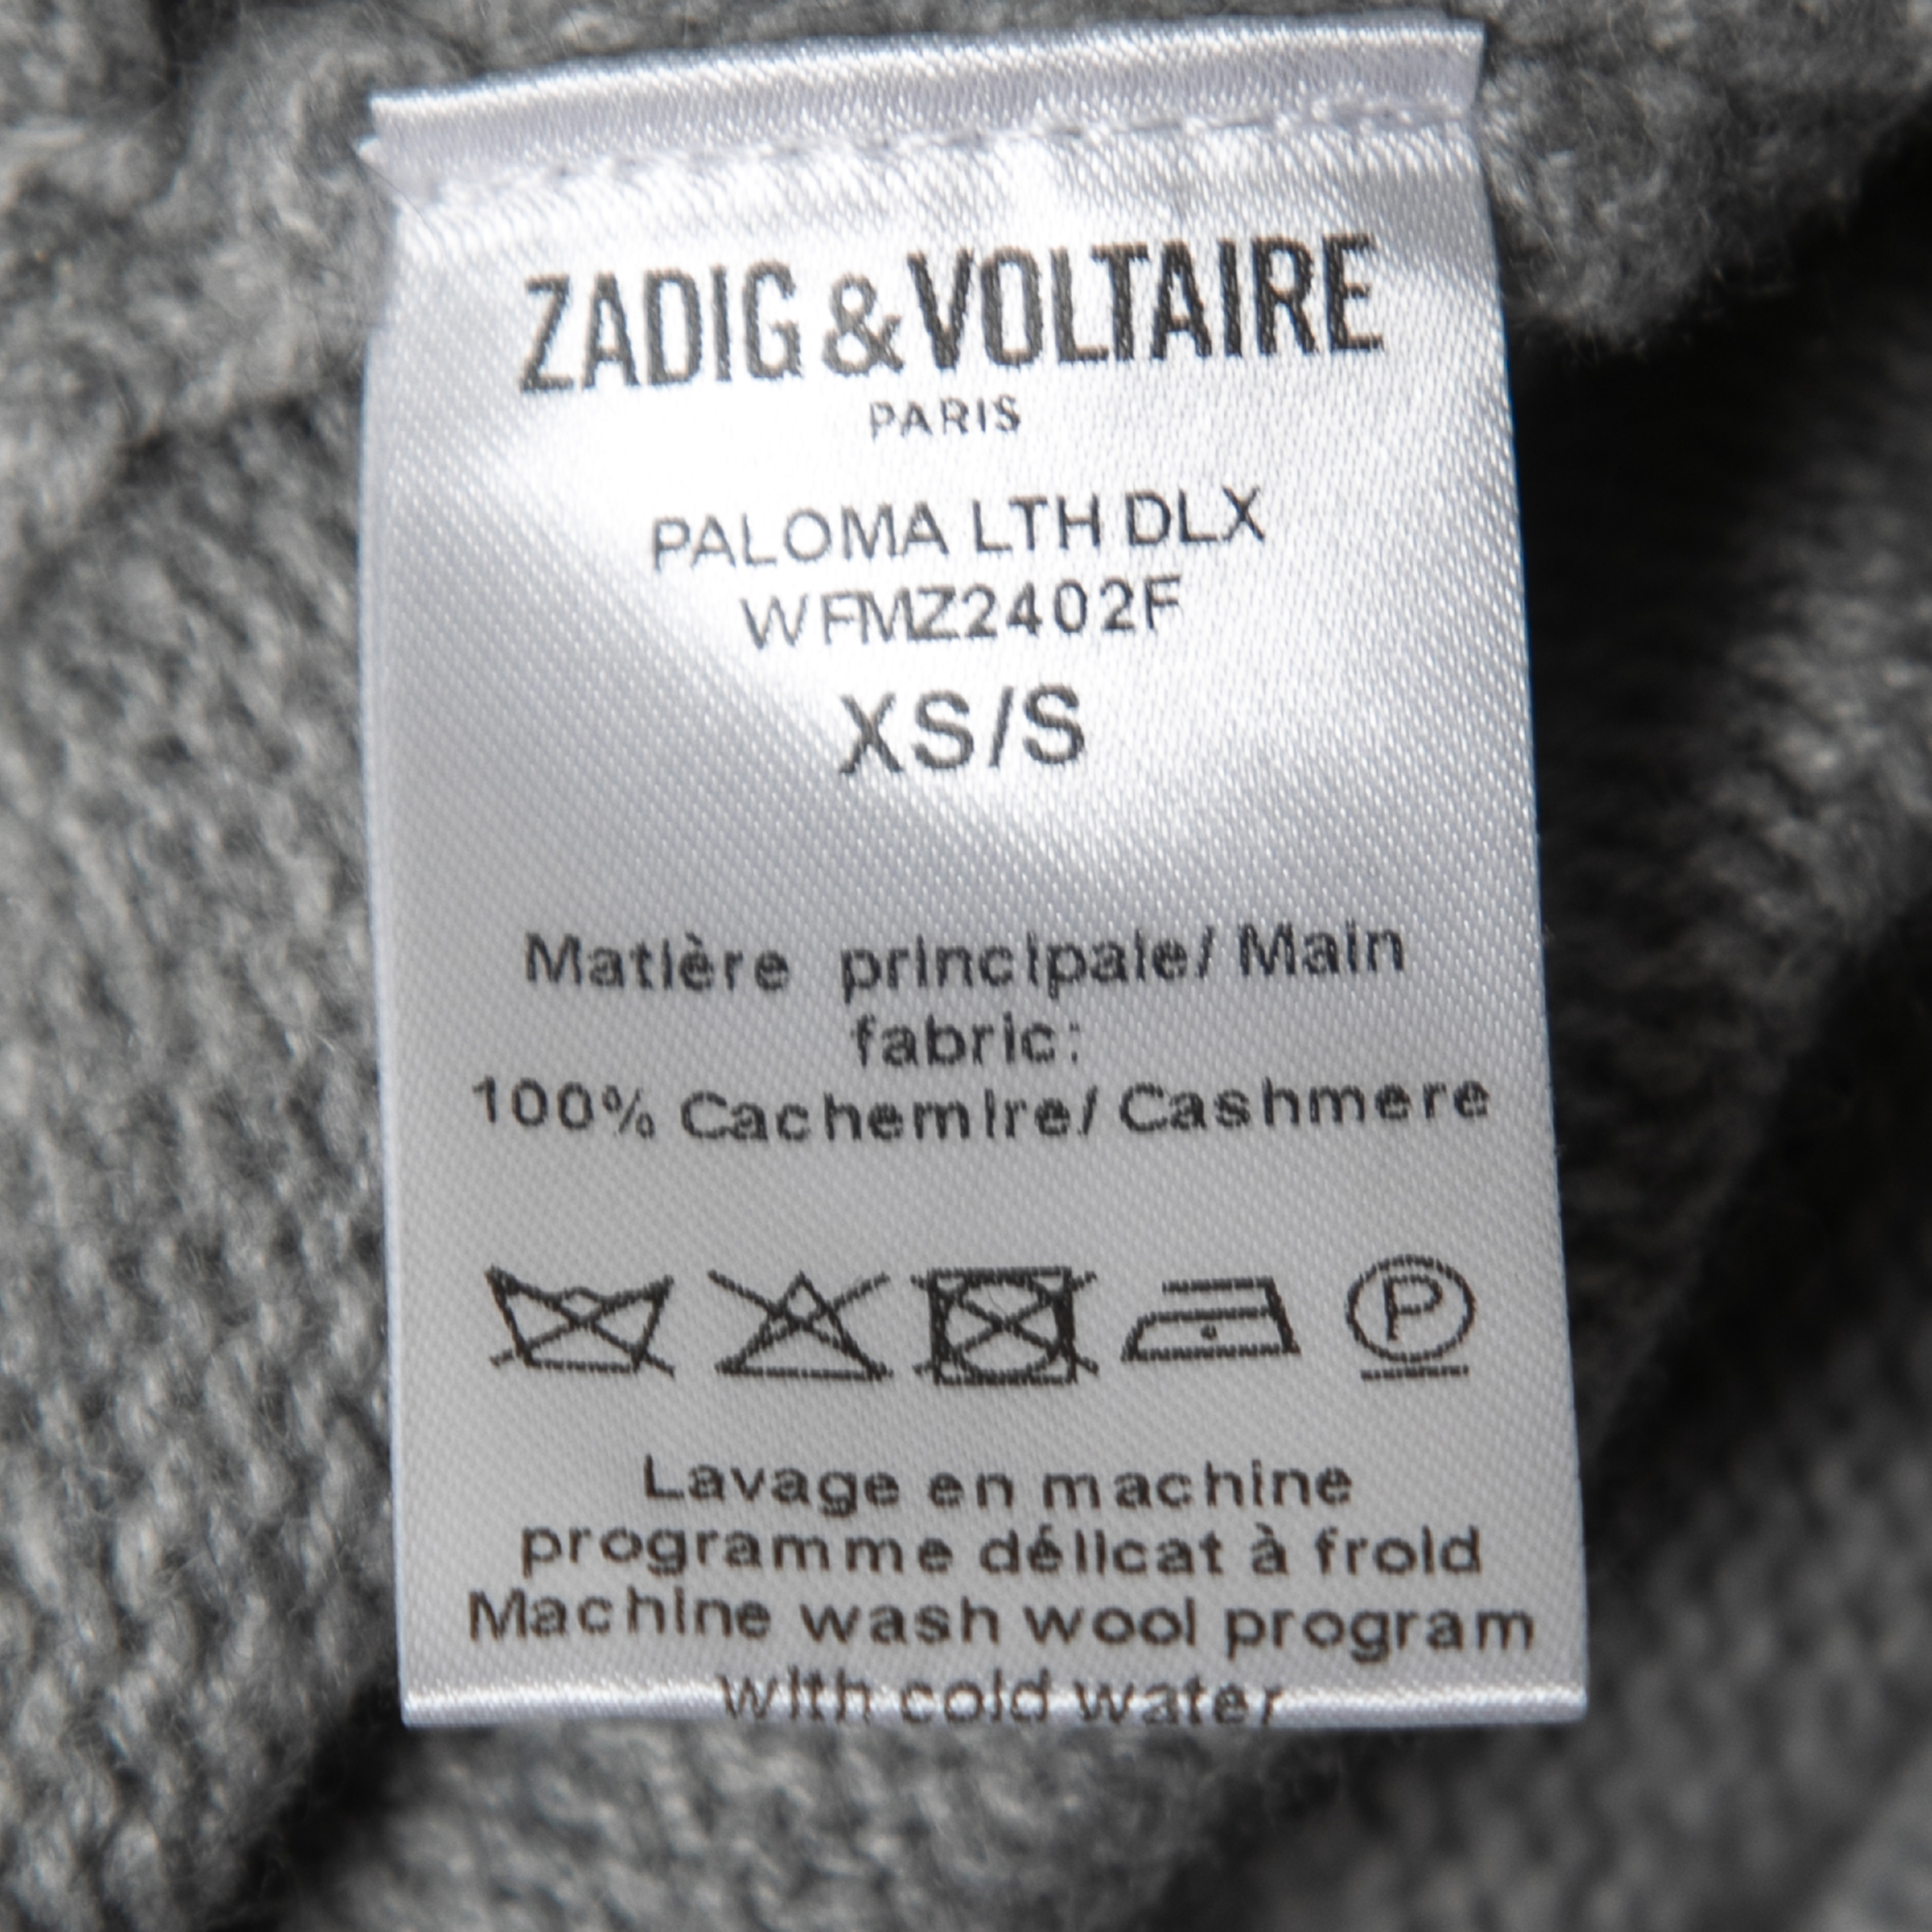 Zadig & Voltaire Grey Cashmere Knit Open Front Fringed Cardigan XS/S